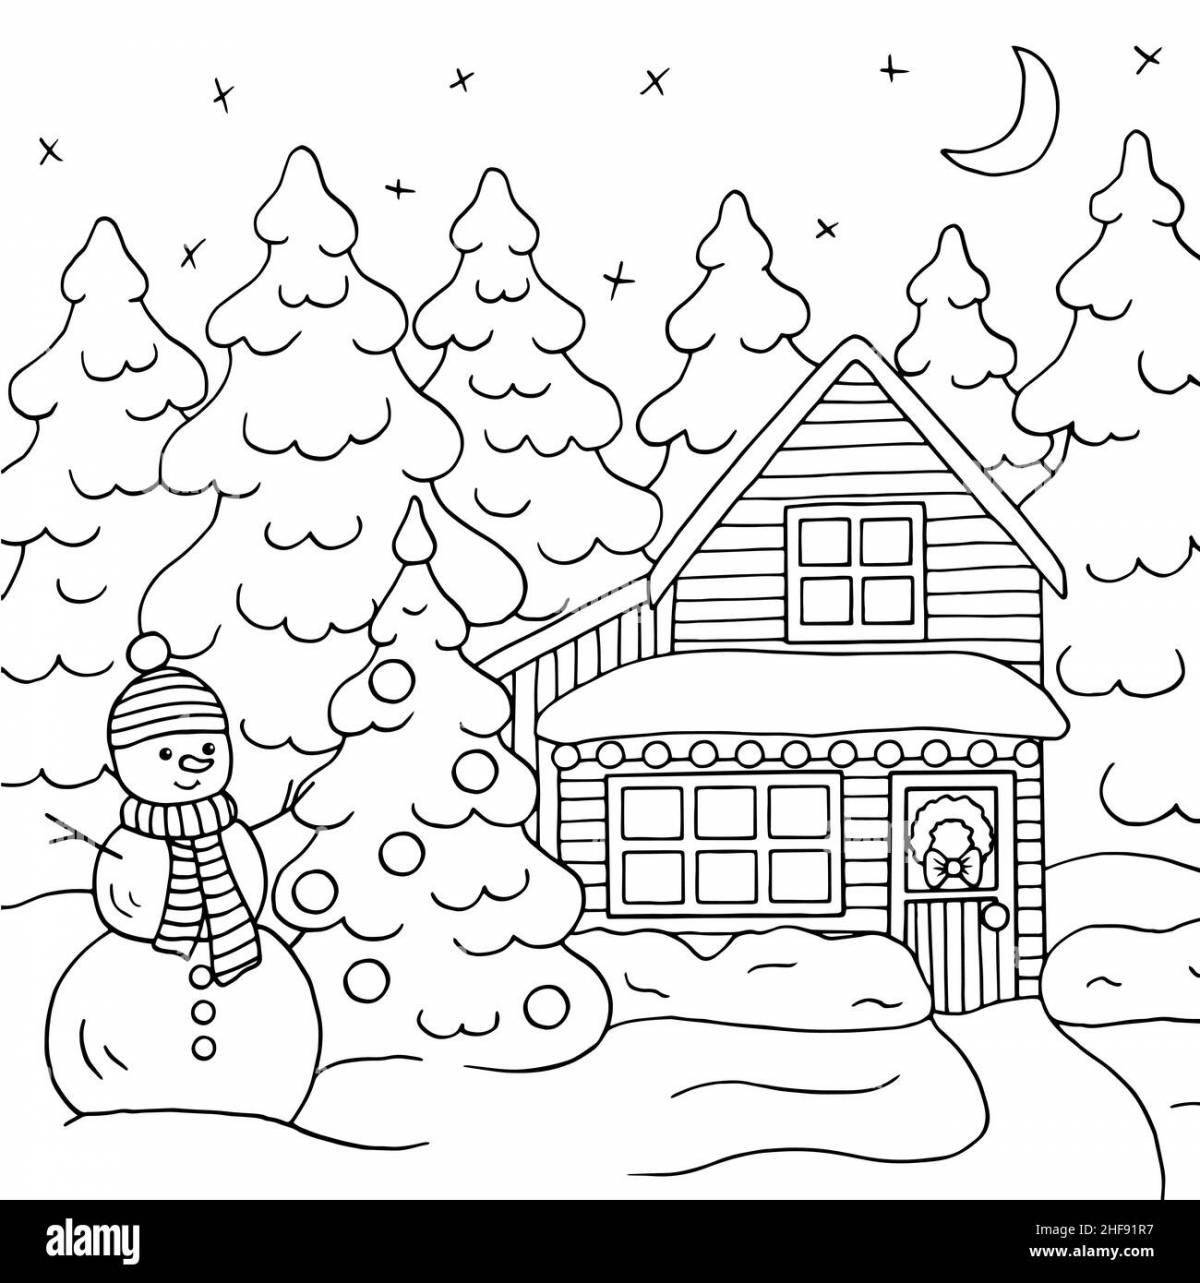 Fantastic winter landscape coloring book for children 3-4 years old